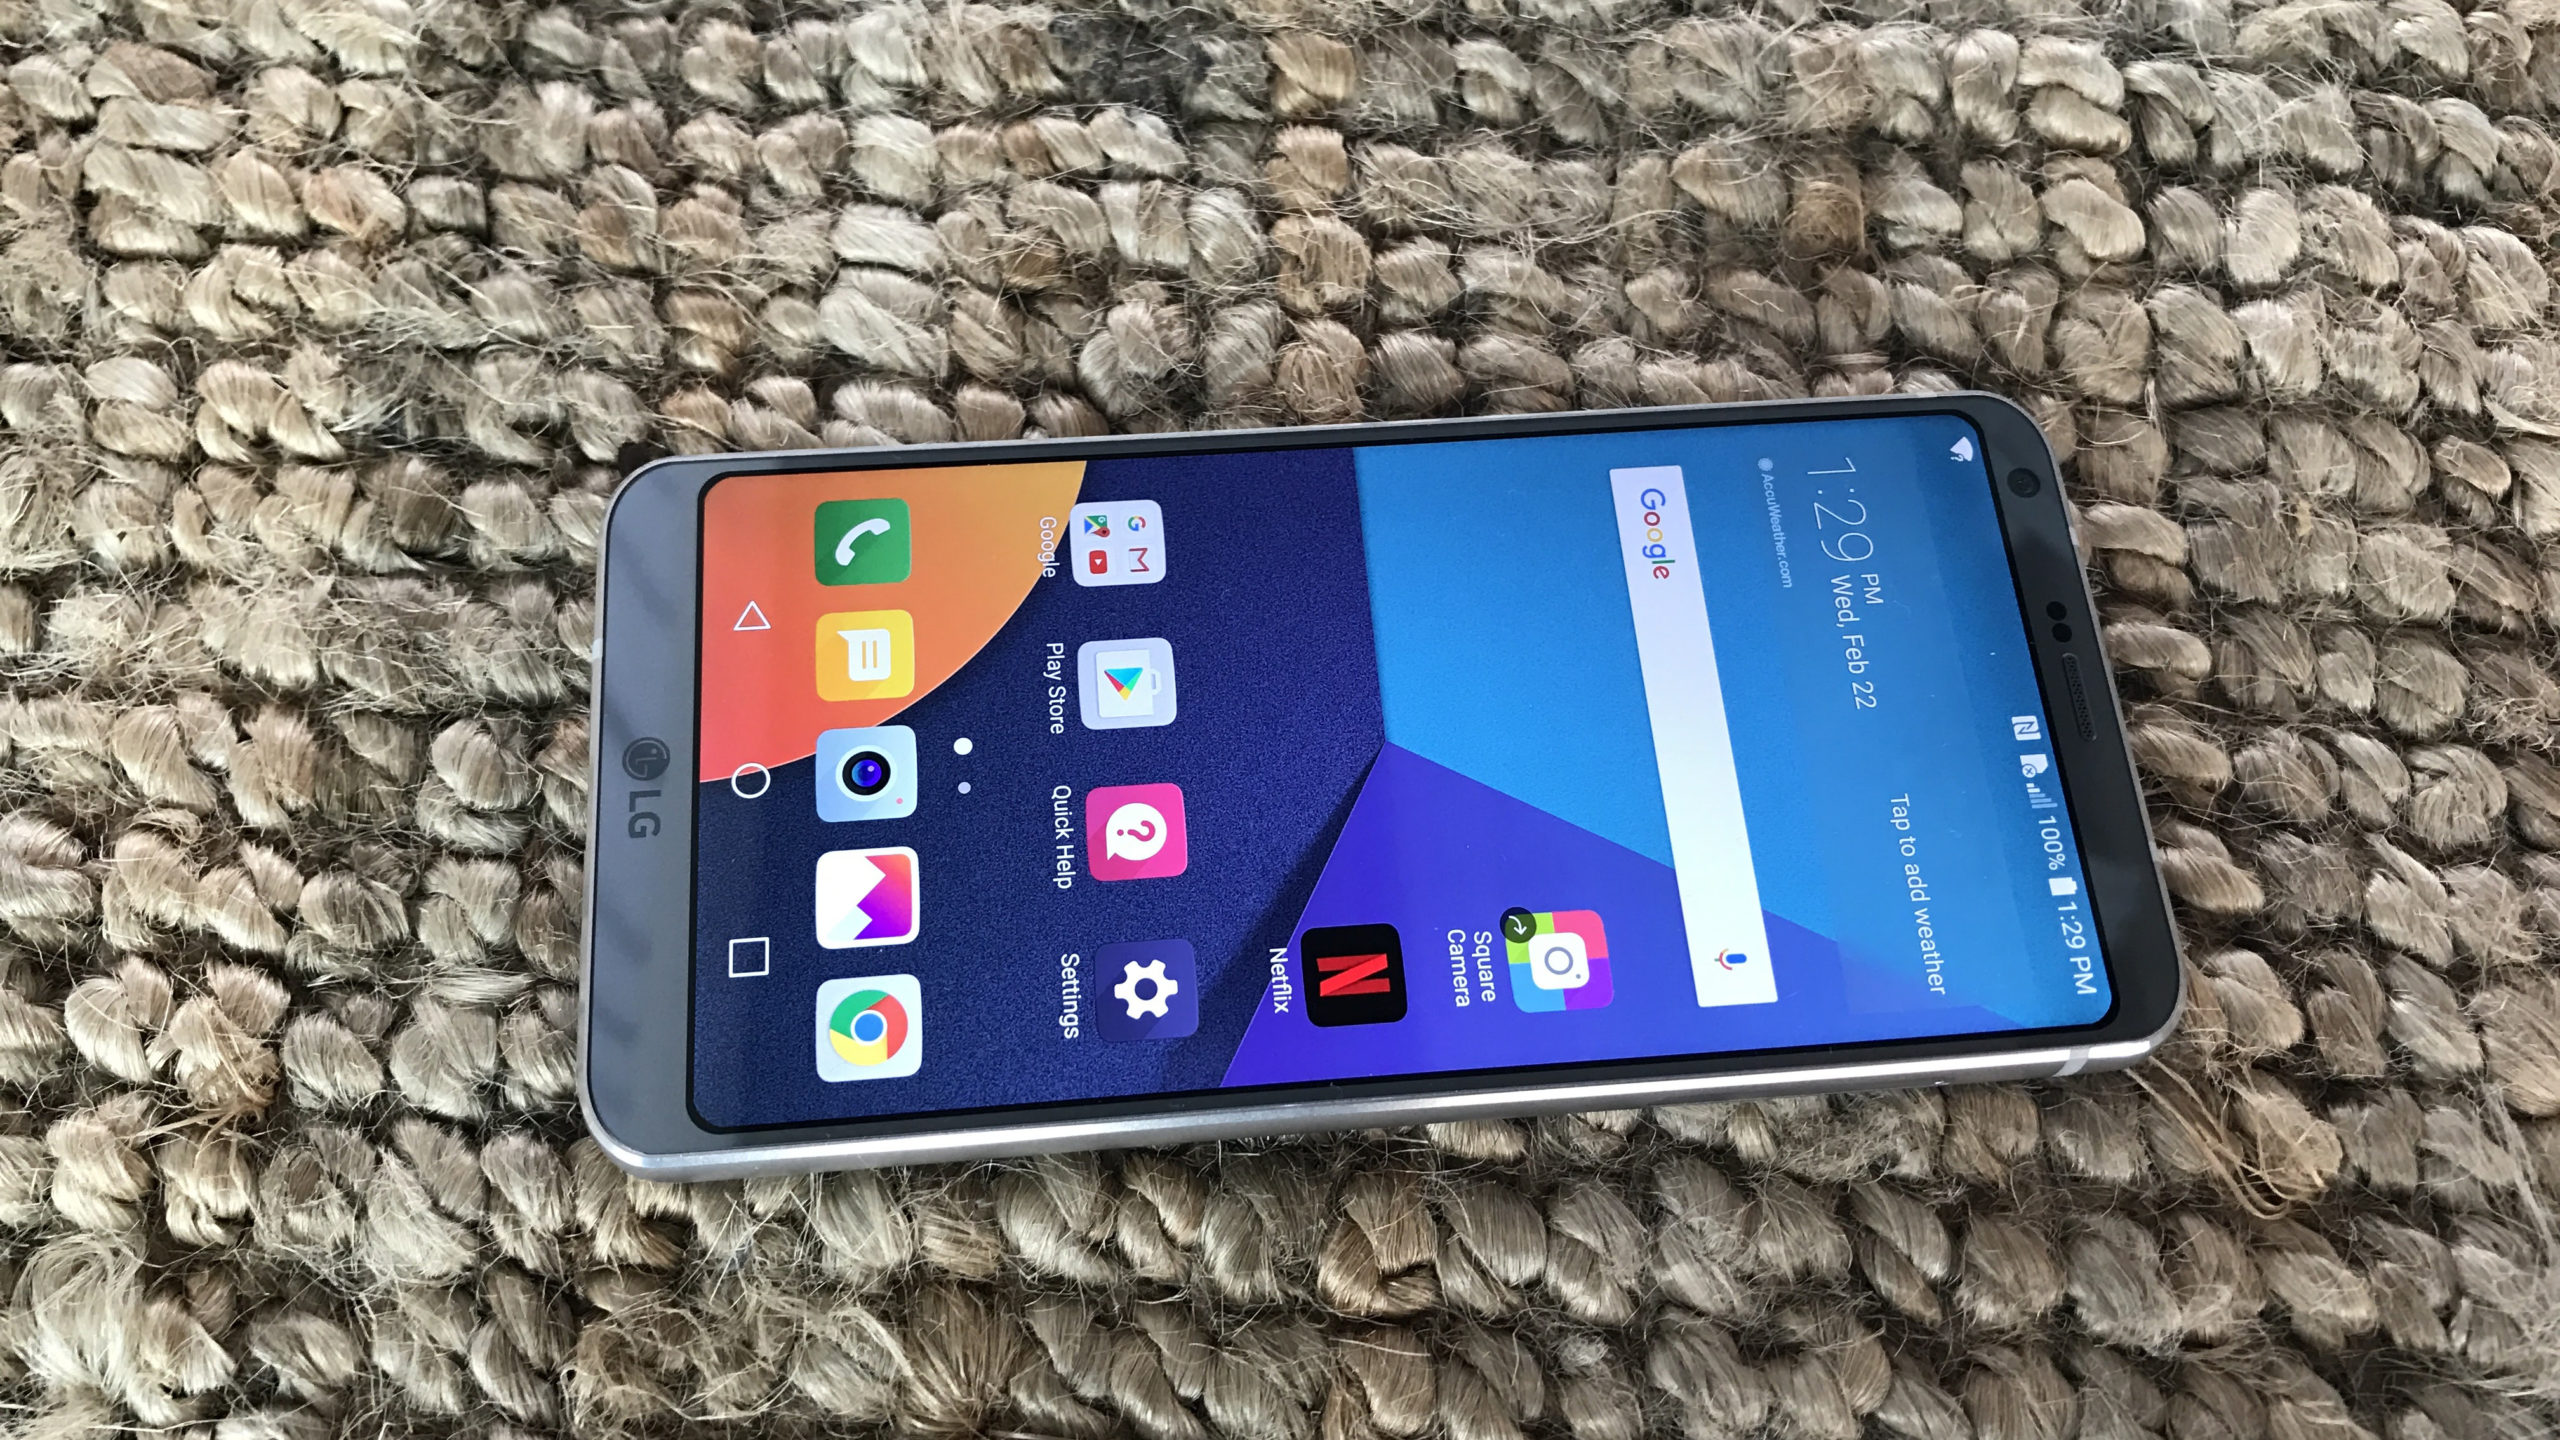 LG G6 First Impressions: Back To The Basics